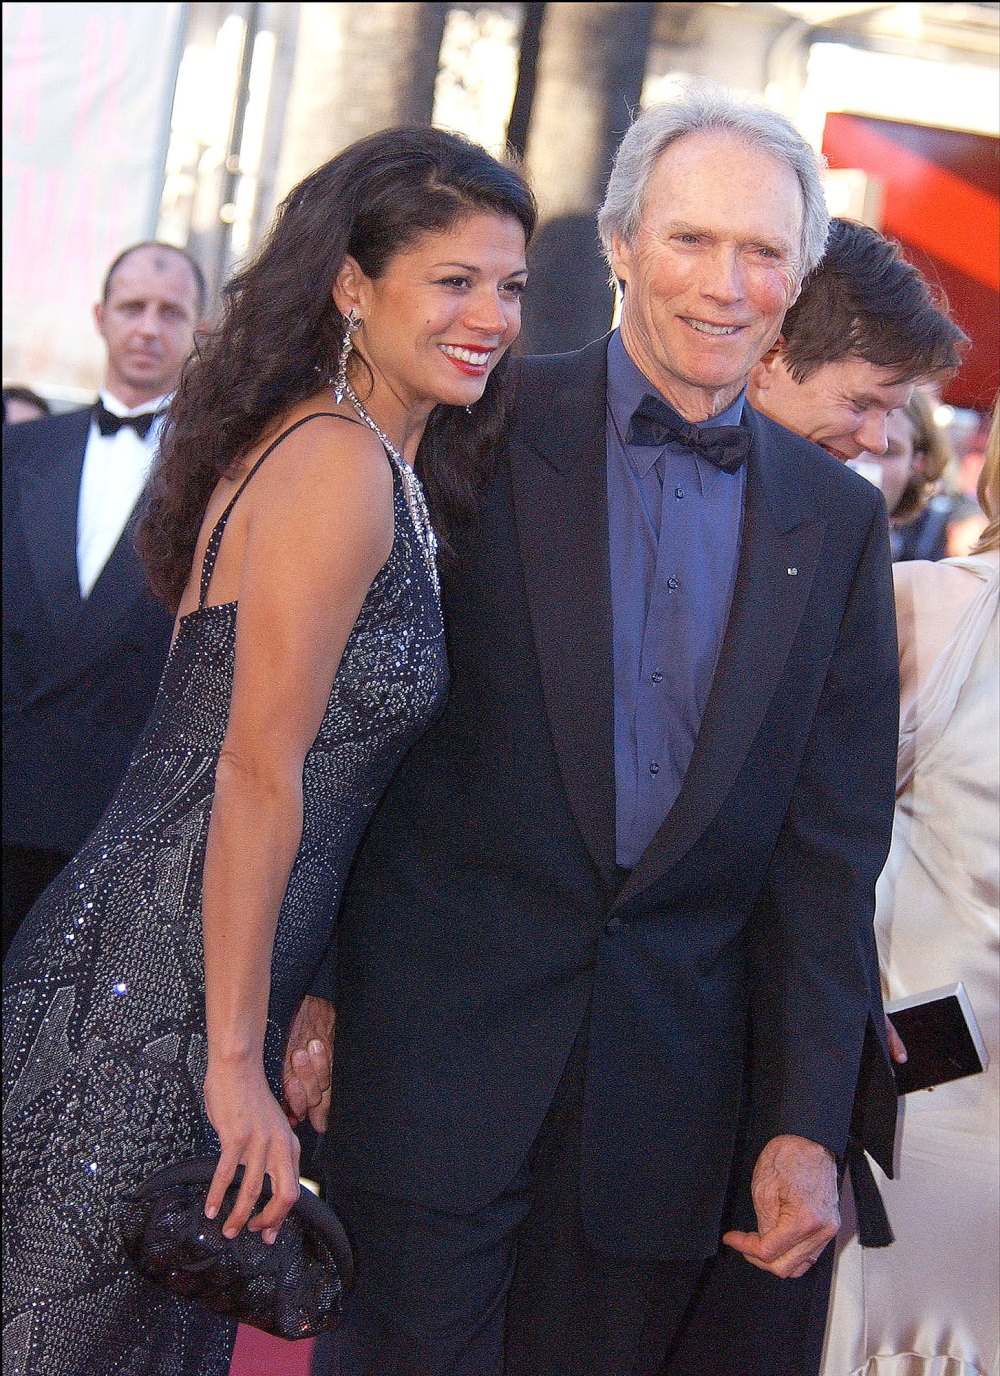 Dina Eastwood Dismissed Legal Separation From Clint Eastwood in Court Papers Just Two Days After Initially Filing